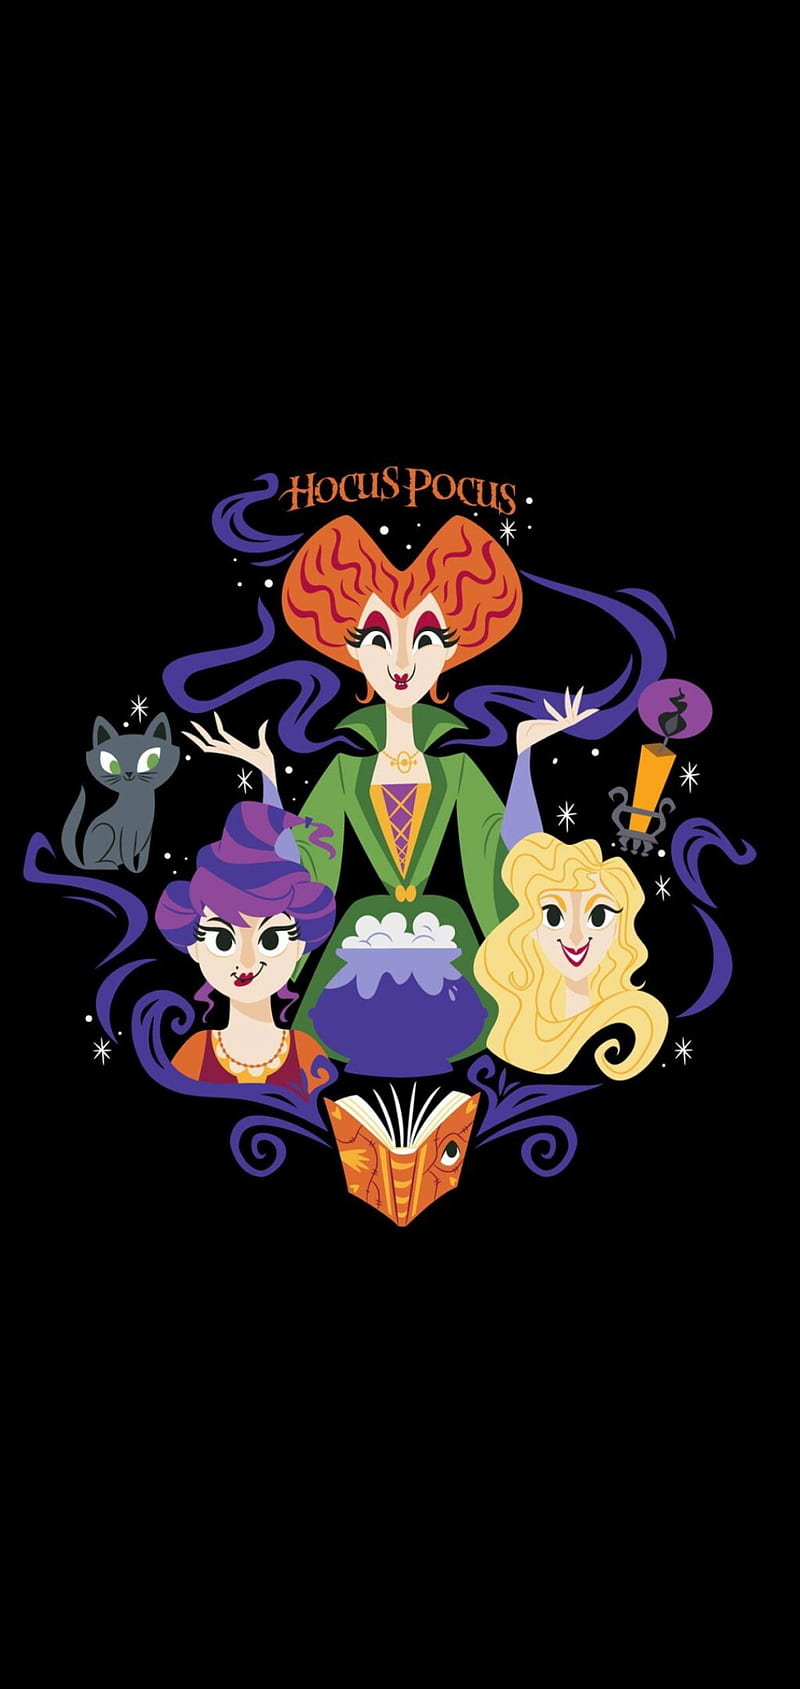 Hocus Pocus Phone Wallpaper with Max Allison Dani Billy and   Halloween wallpaper iphone backgrounds Halloween wallpaper cute Halloween wallpaper  backgrounds